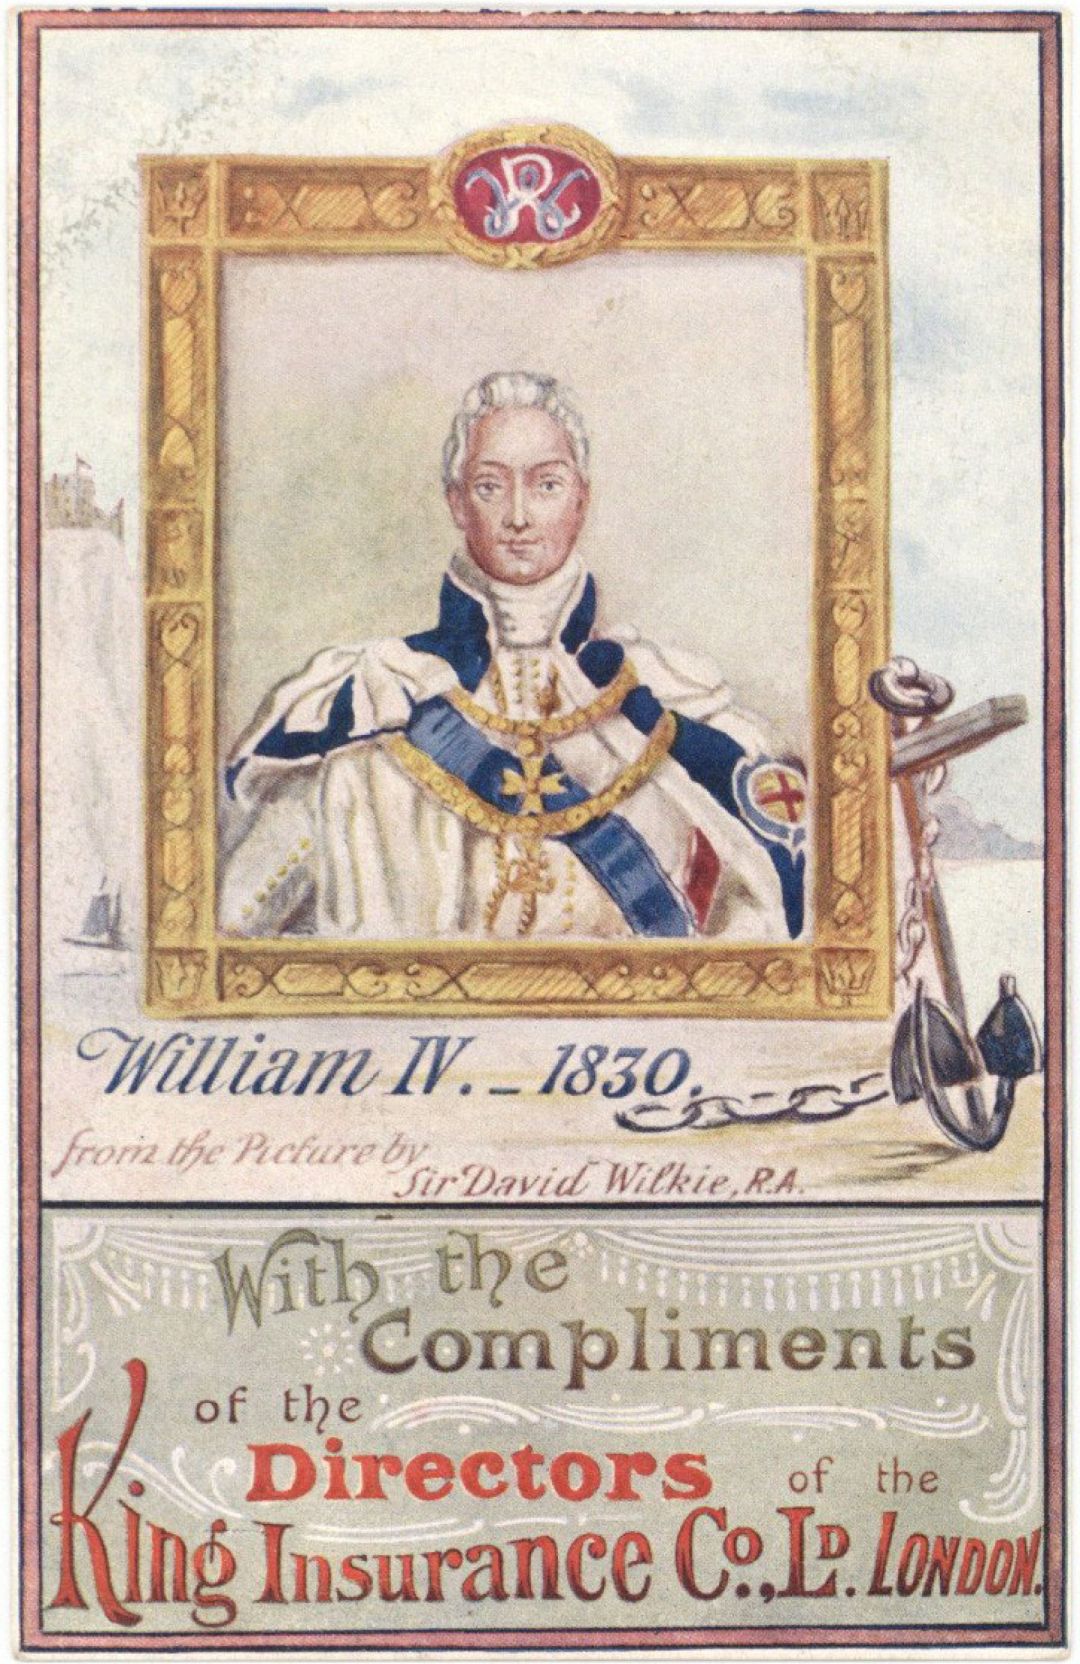 Post Card Ad for King Insurance Co. Ltd. dated 1830 -  Insurance